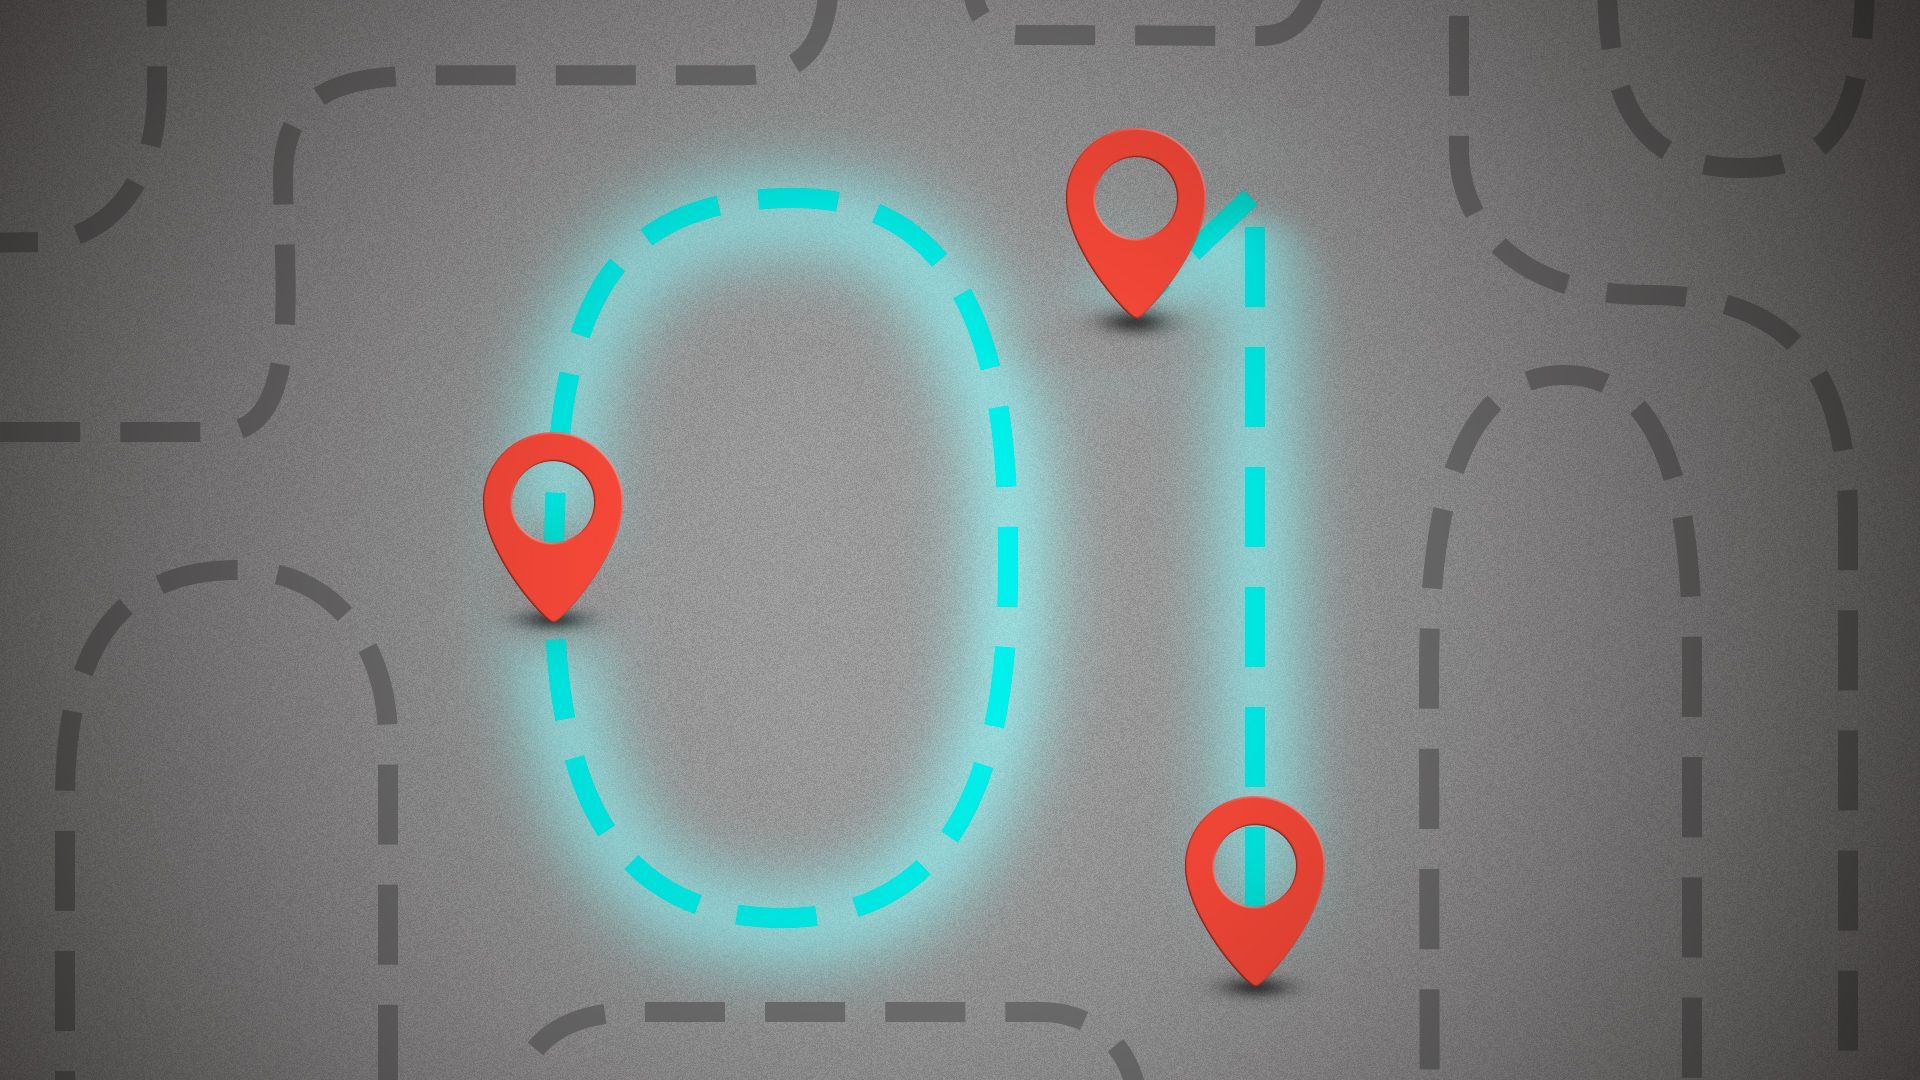 Illustration of a zero and a one created out of dotted lines, with navigation icons highlighting the ends of the numbers. 